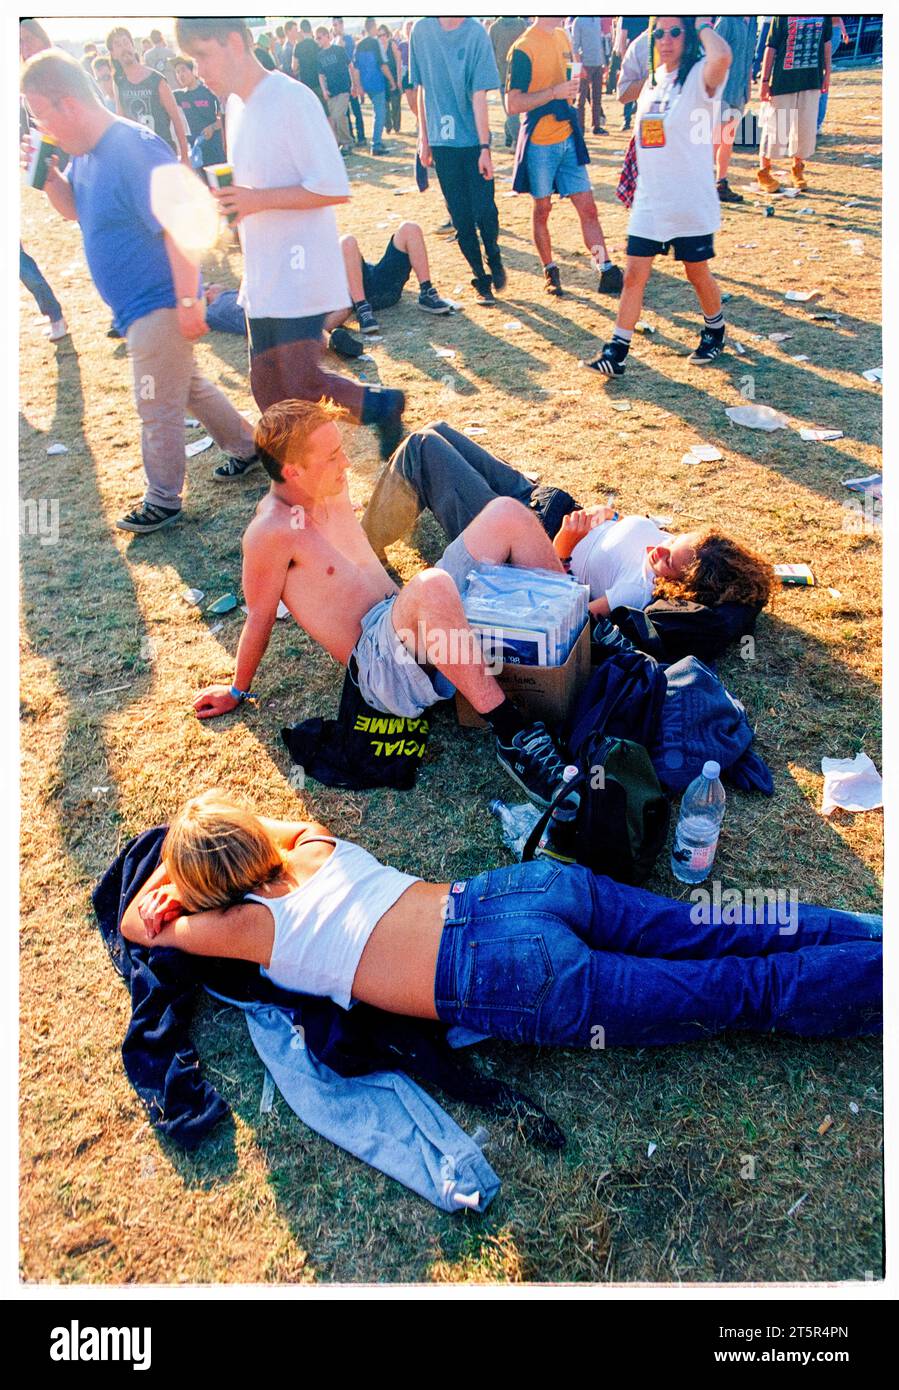 BRITPOP and ROCK FANS, READING FESTIVAL, 1998: A group of friends chill out with a record box in the crowd. A scene from the site and crowd in the Main Stage arena area at Reading Festival 1998 on 28-30 August 1998 in Reading, England UK. Photo: Rob Watkins Stock Photo